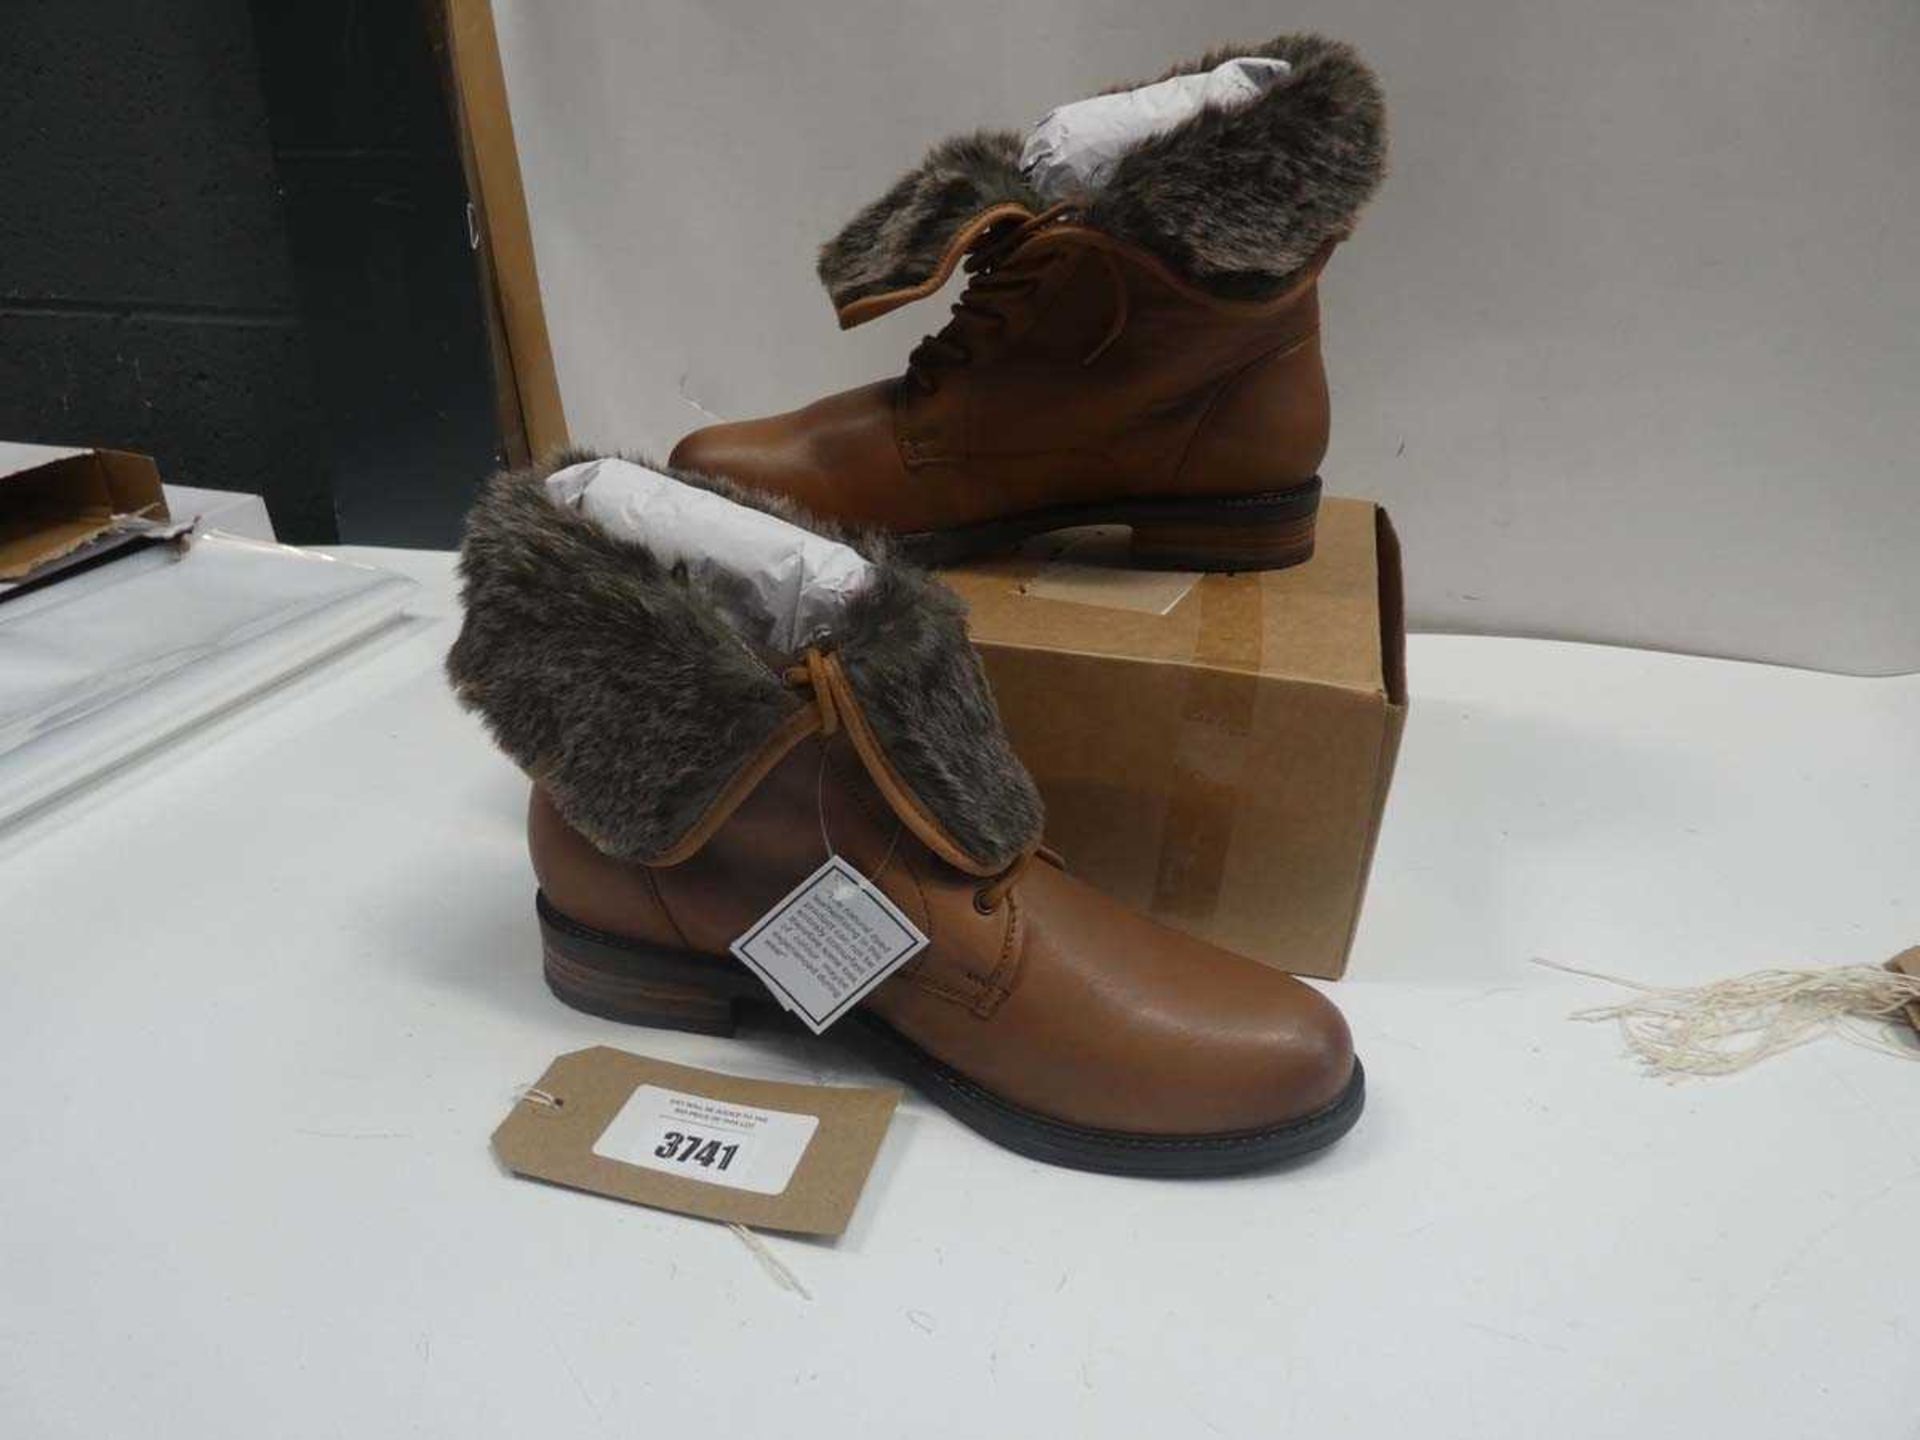 +VAT Pair of J D Wlliams ankle boots in tan, size UK 9 (with box)